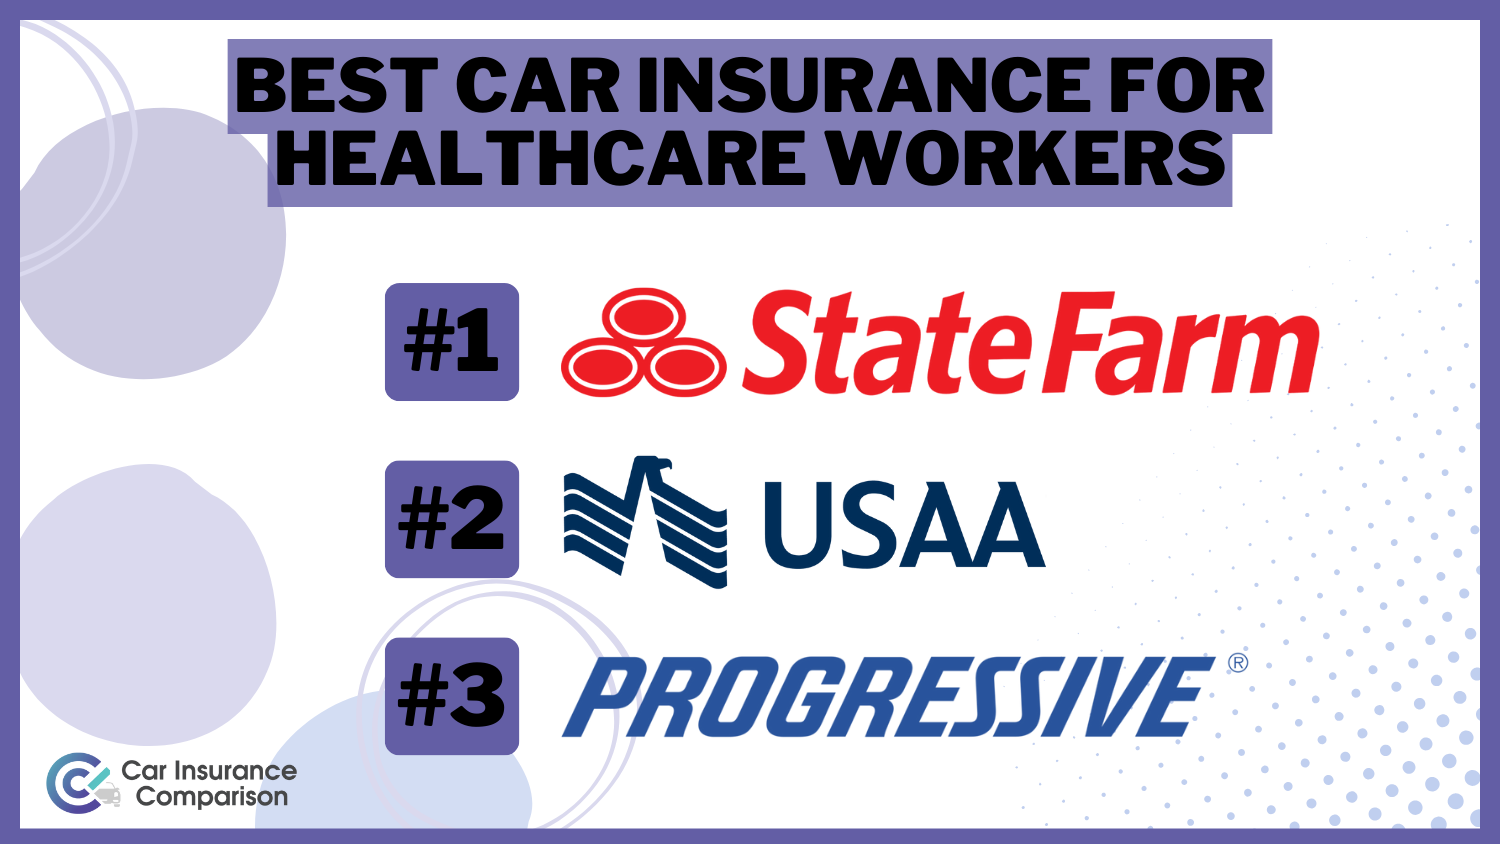 3 Best Car Insurance for Healthcare Workers: State Farm, USAA, and Progressive.